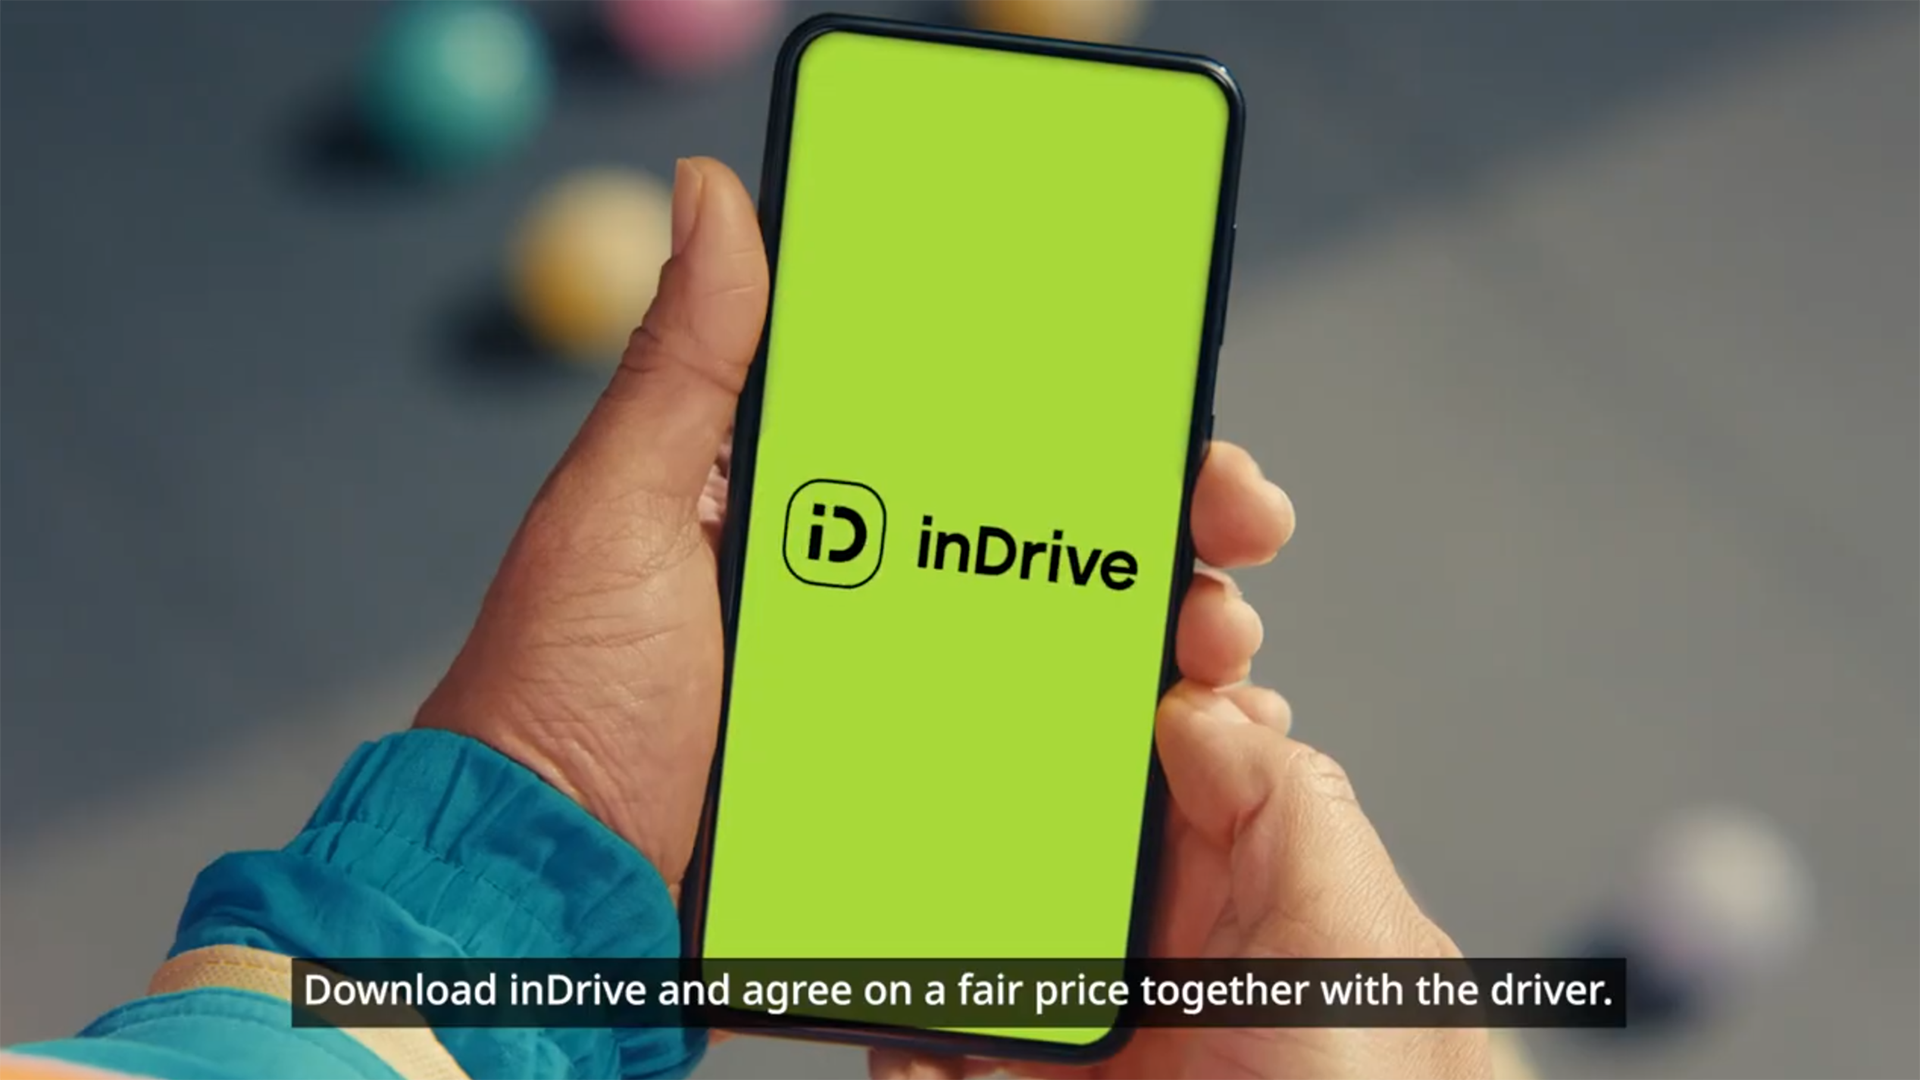 InDrive begins operating $100M Ventures and M&A Division for Startups in Emerging Markets